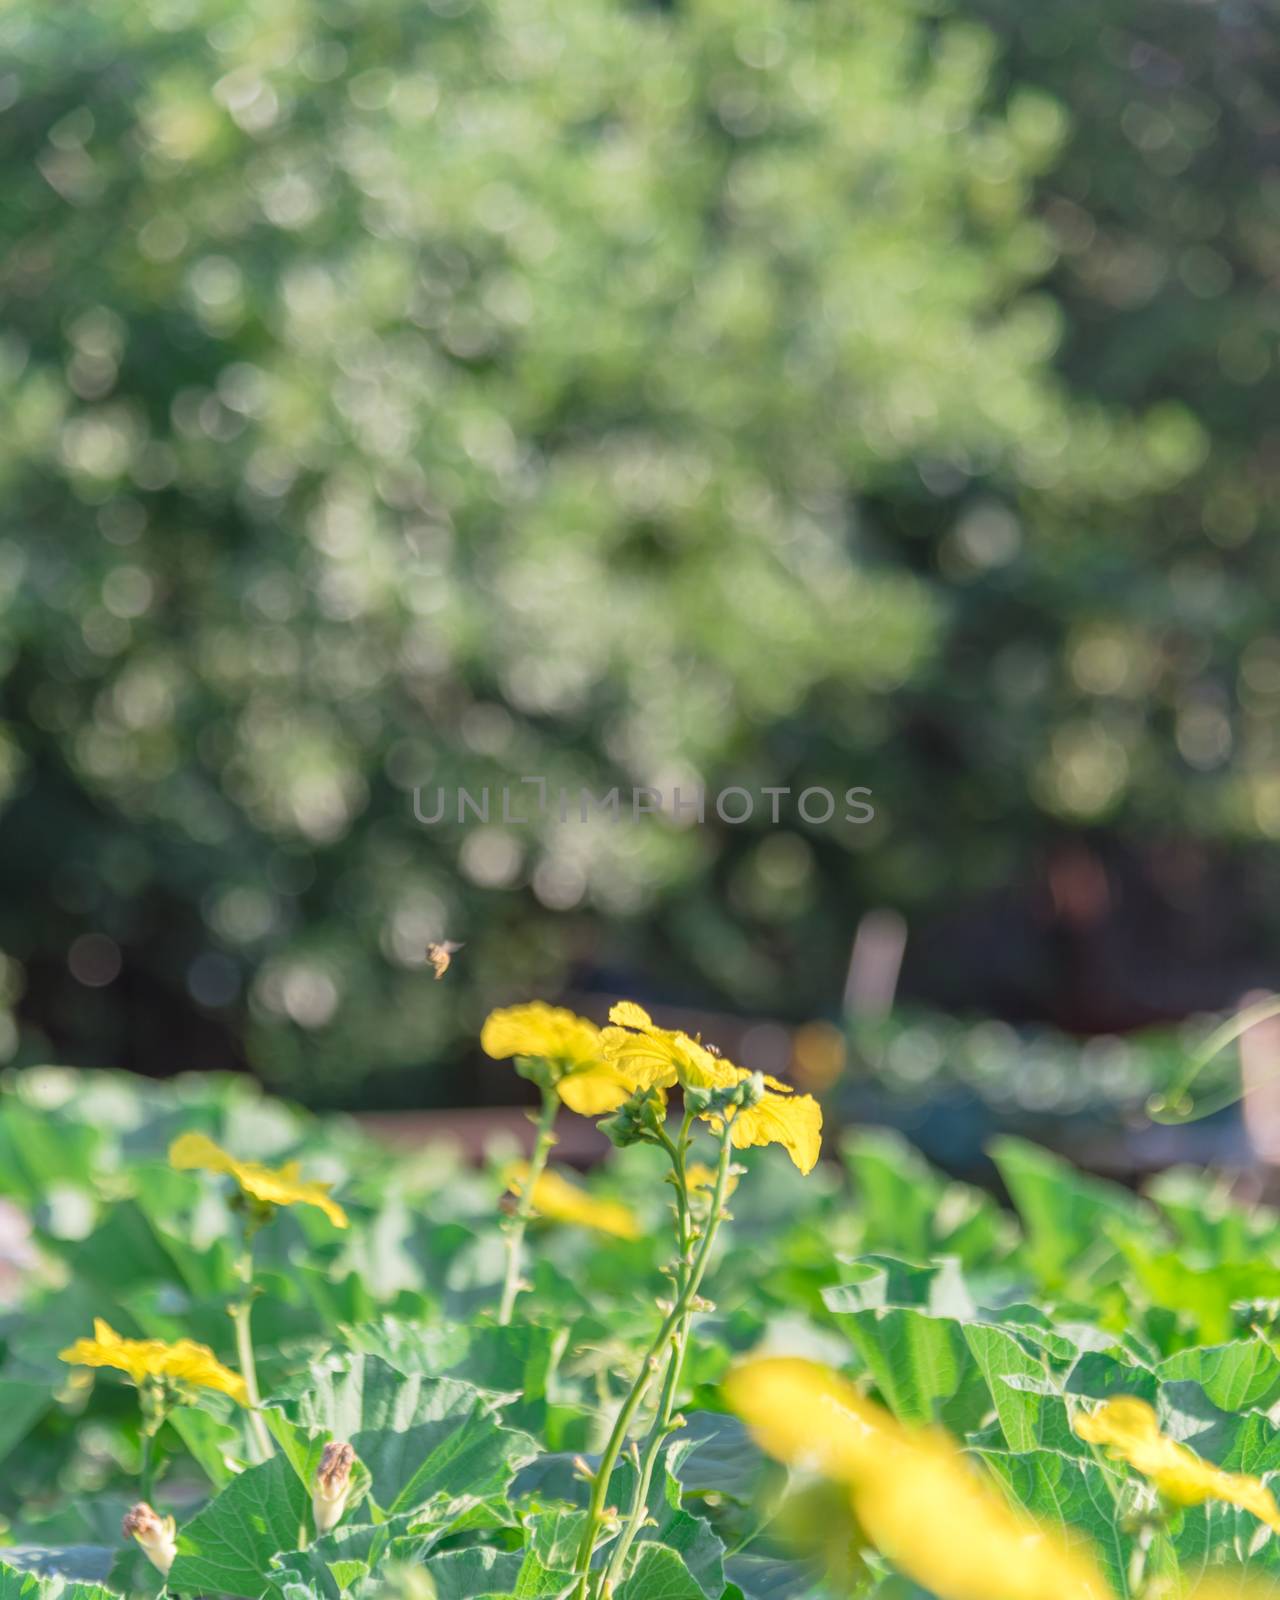 Blossom yellow flowers of Luffa tropical vines with mature tree foliage background at organic garden near Dallas, Texas, USA by trongnguyen